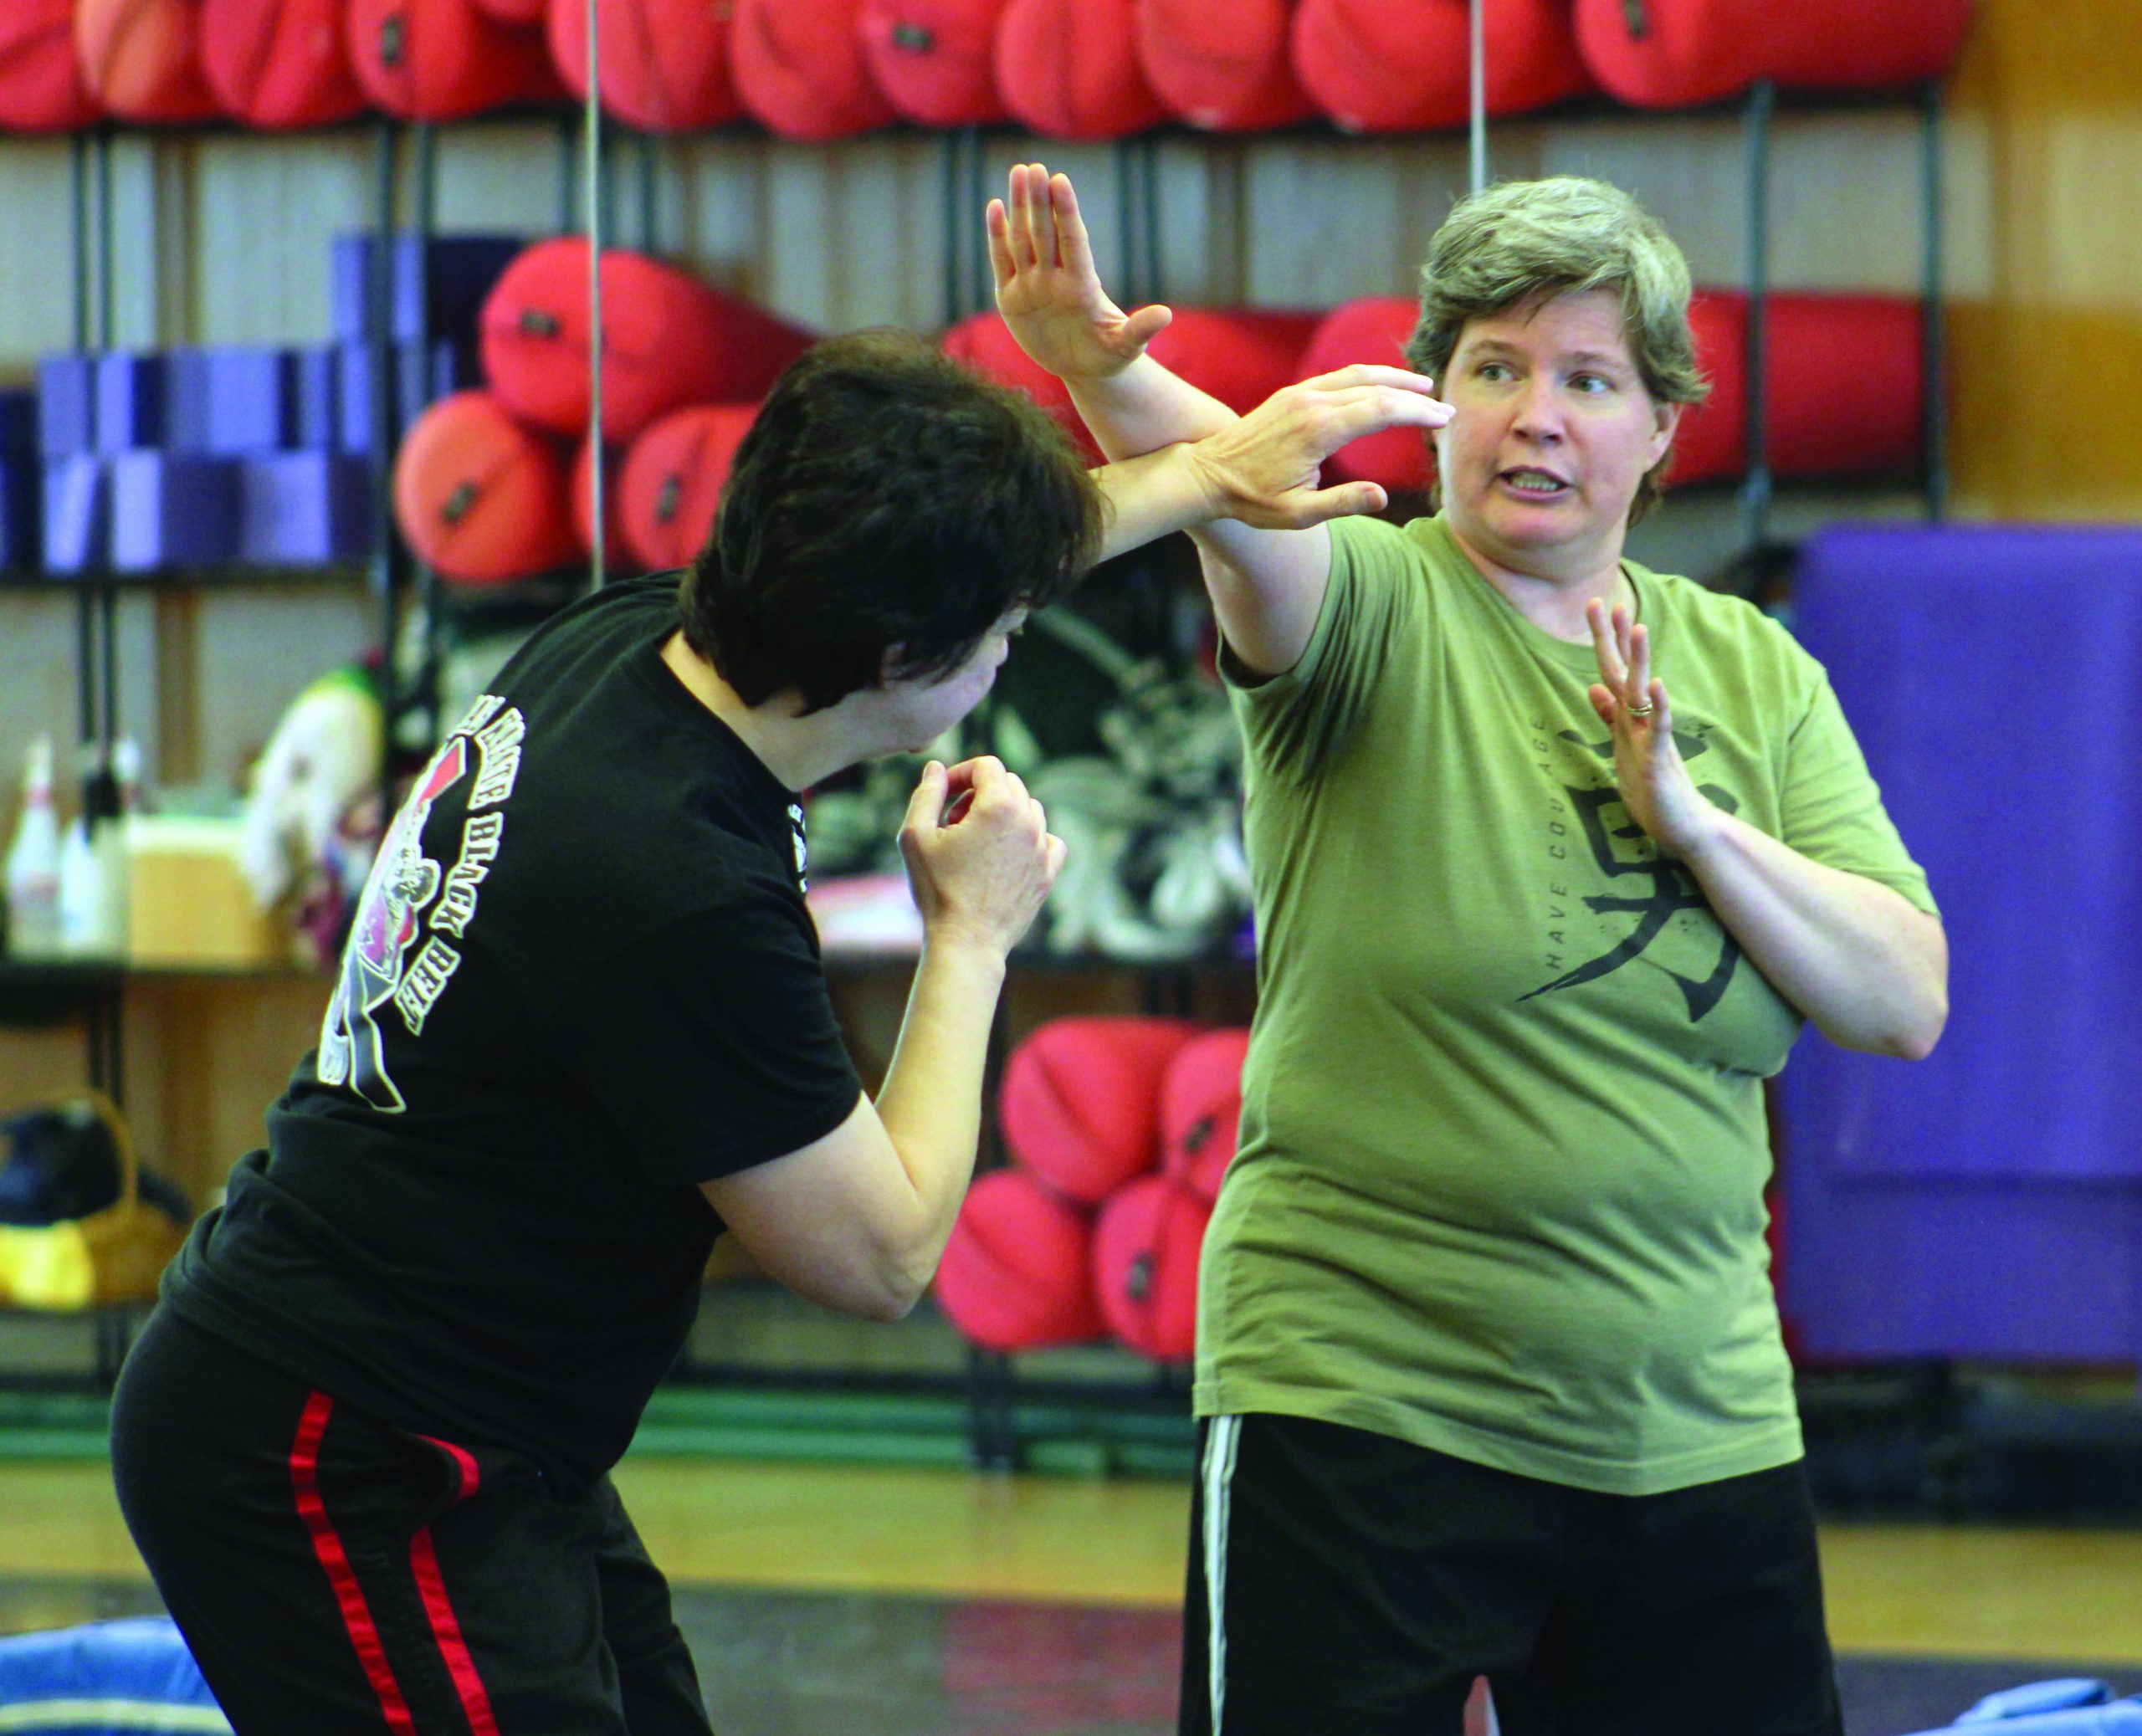 Self-defense classes offered to DMC students and staff